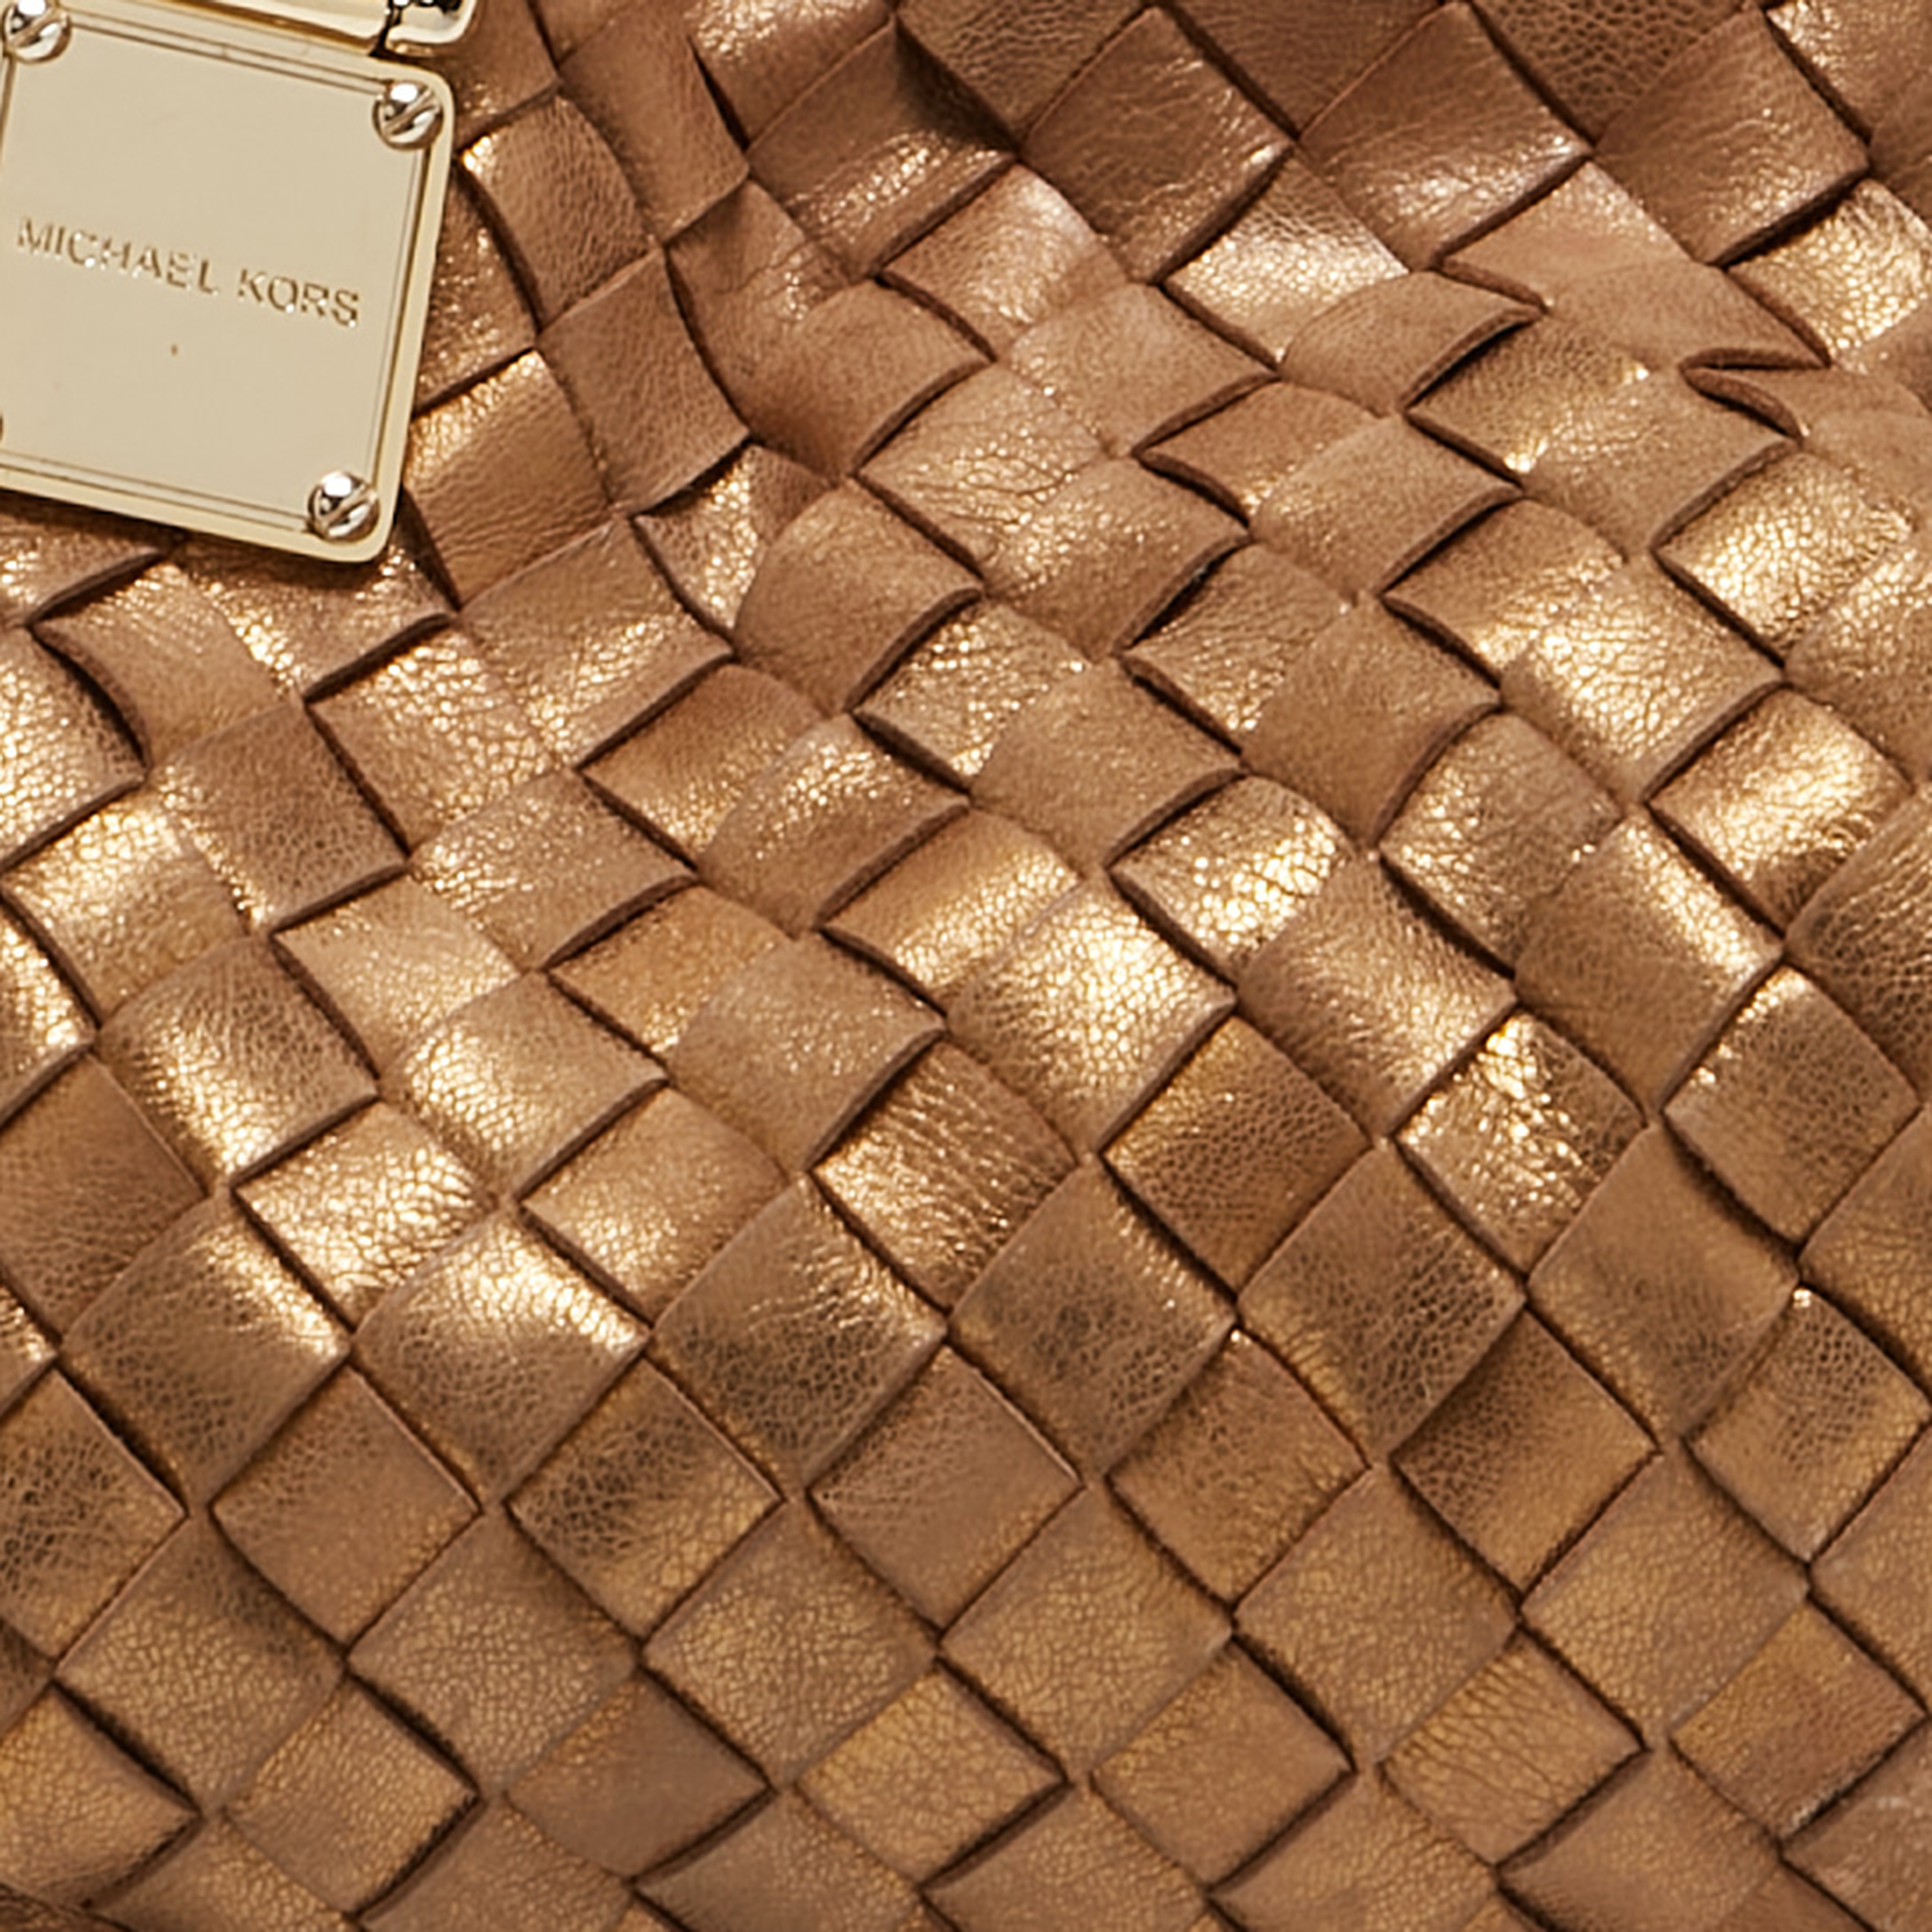 Michael Kors Gold Woven Leather Drawstring Tote